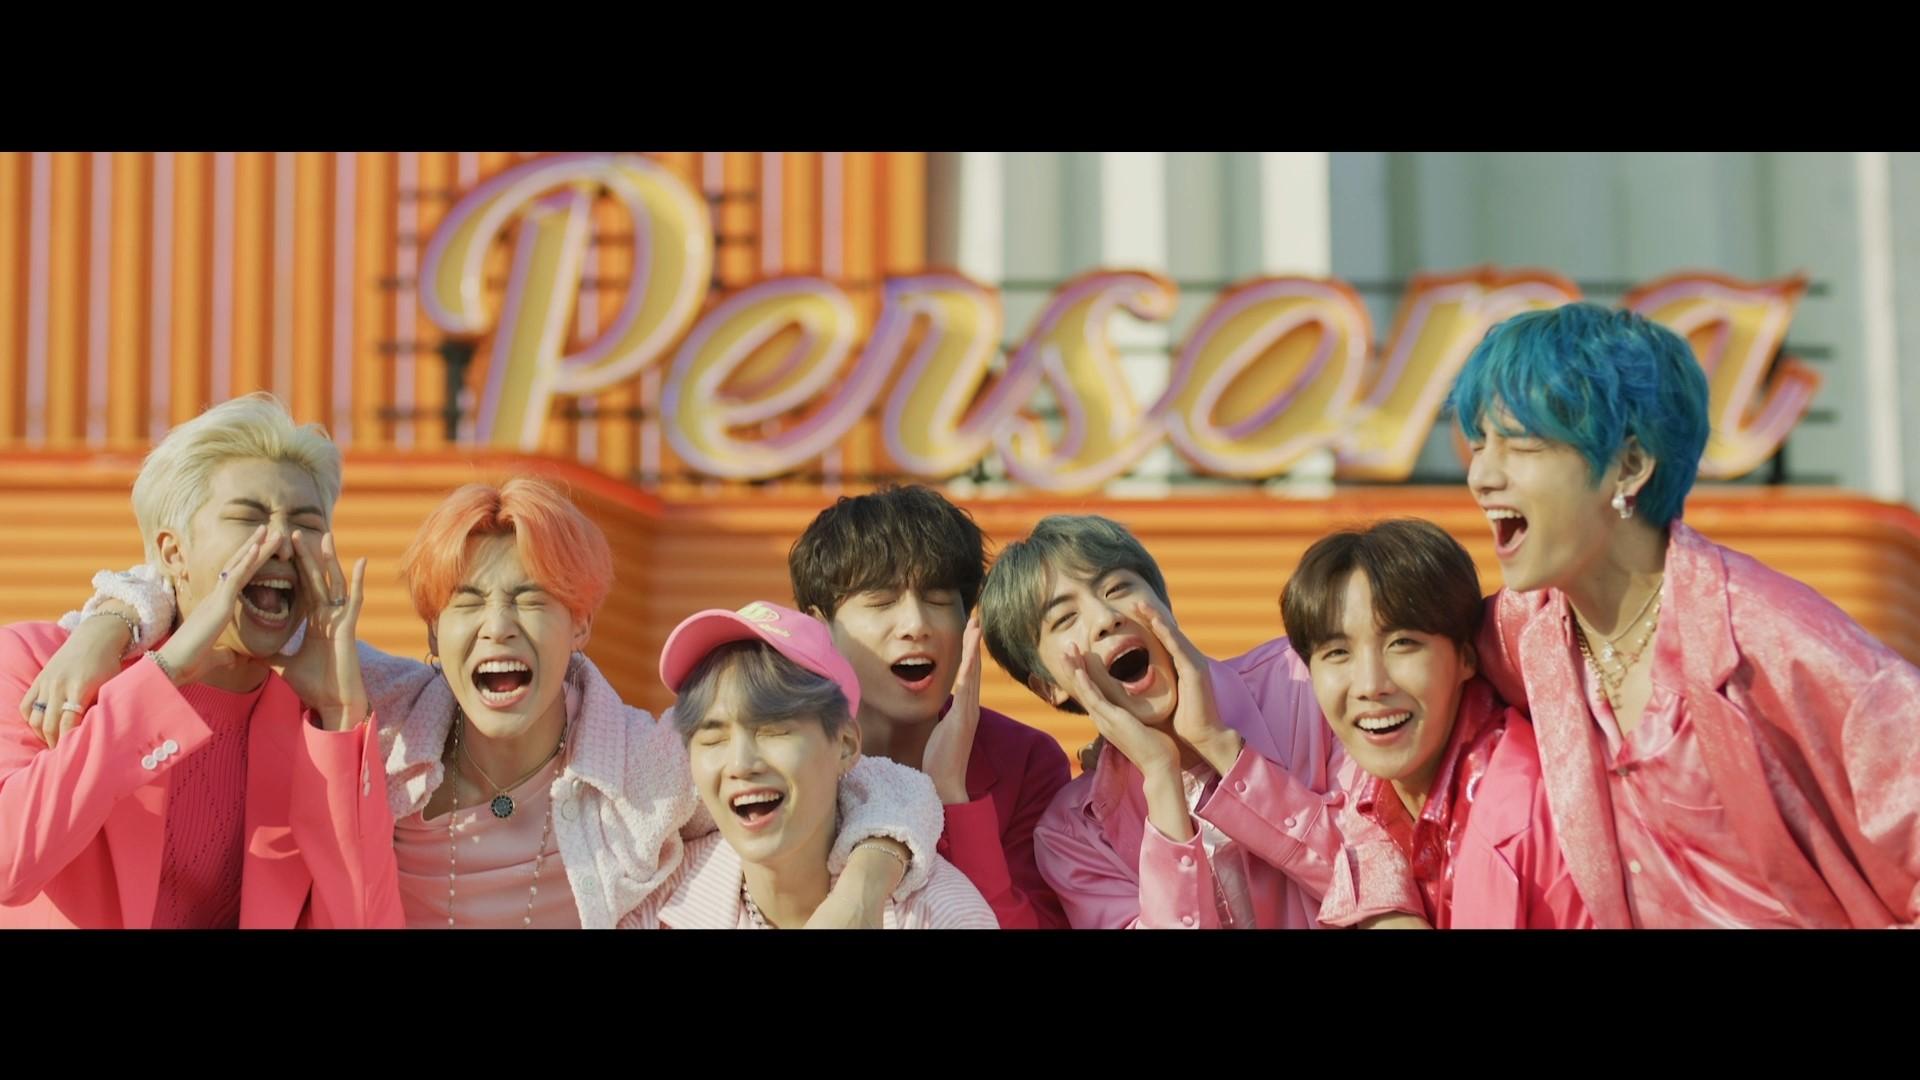 BTS' (Bantan Boys) 'Boy With Luv' (feat. Halsey) Fashion Review